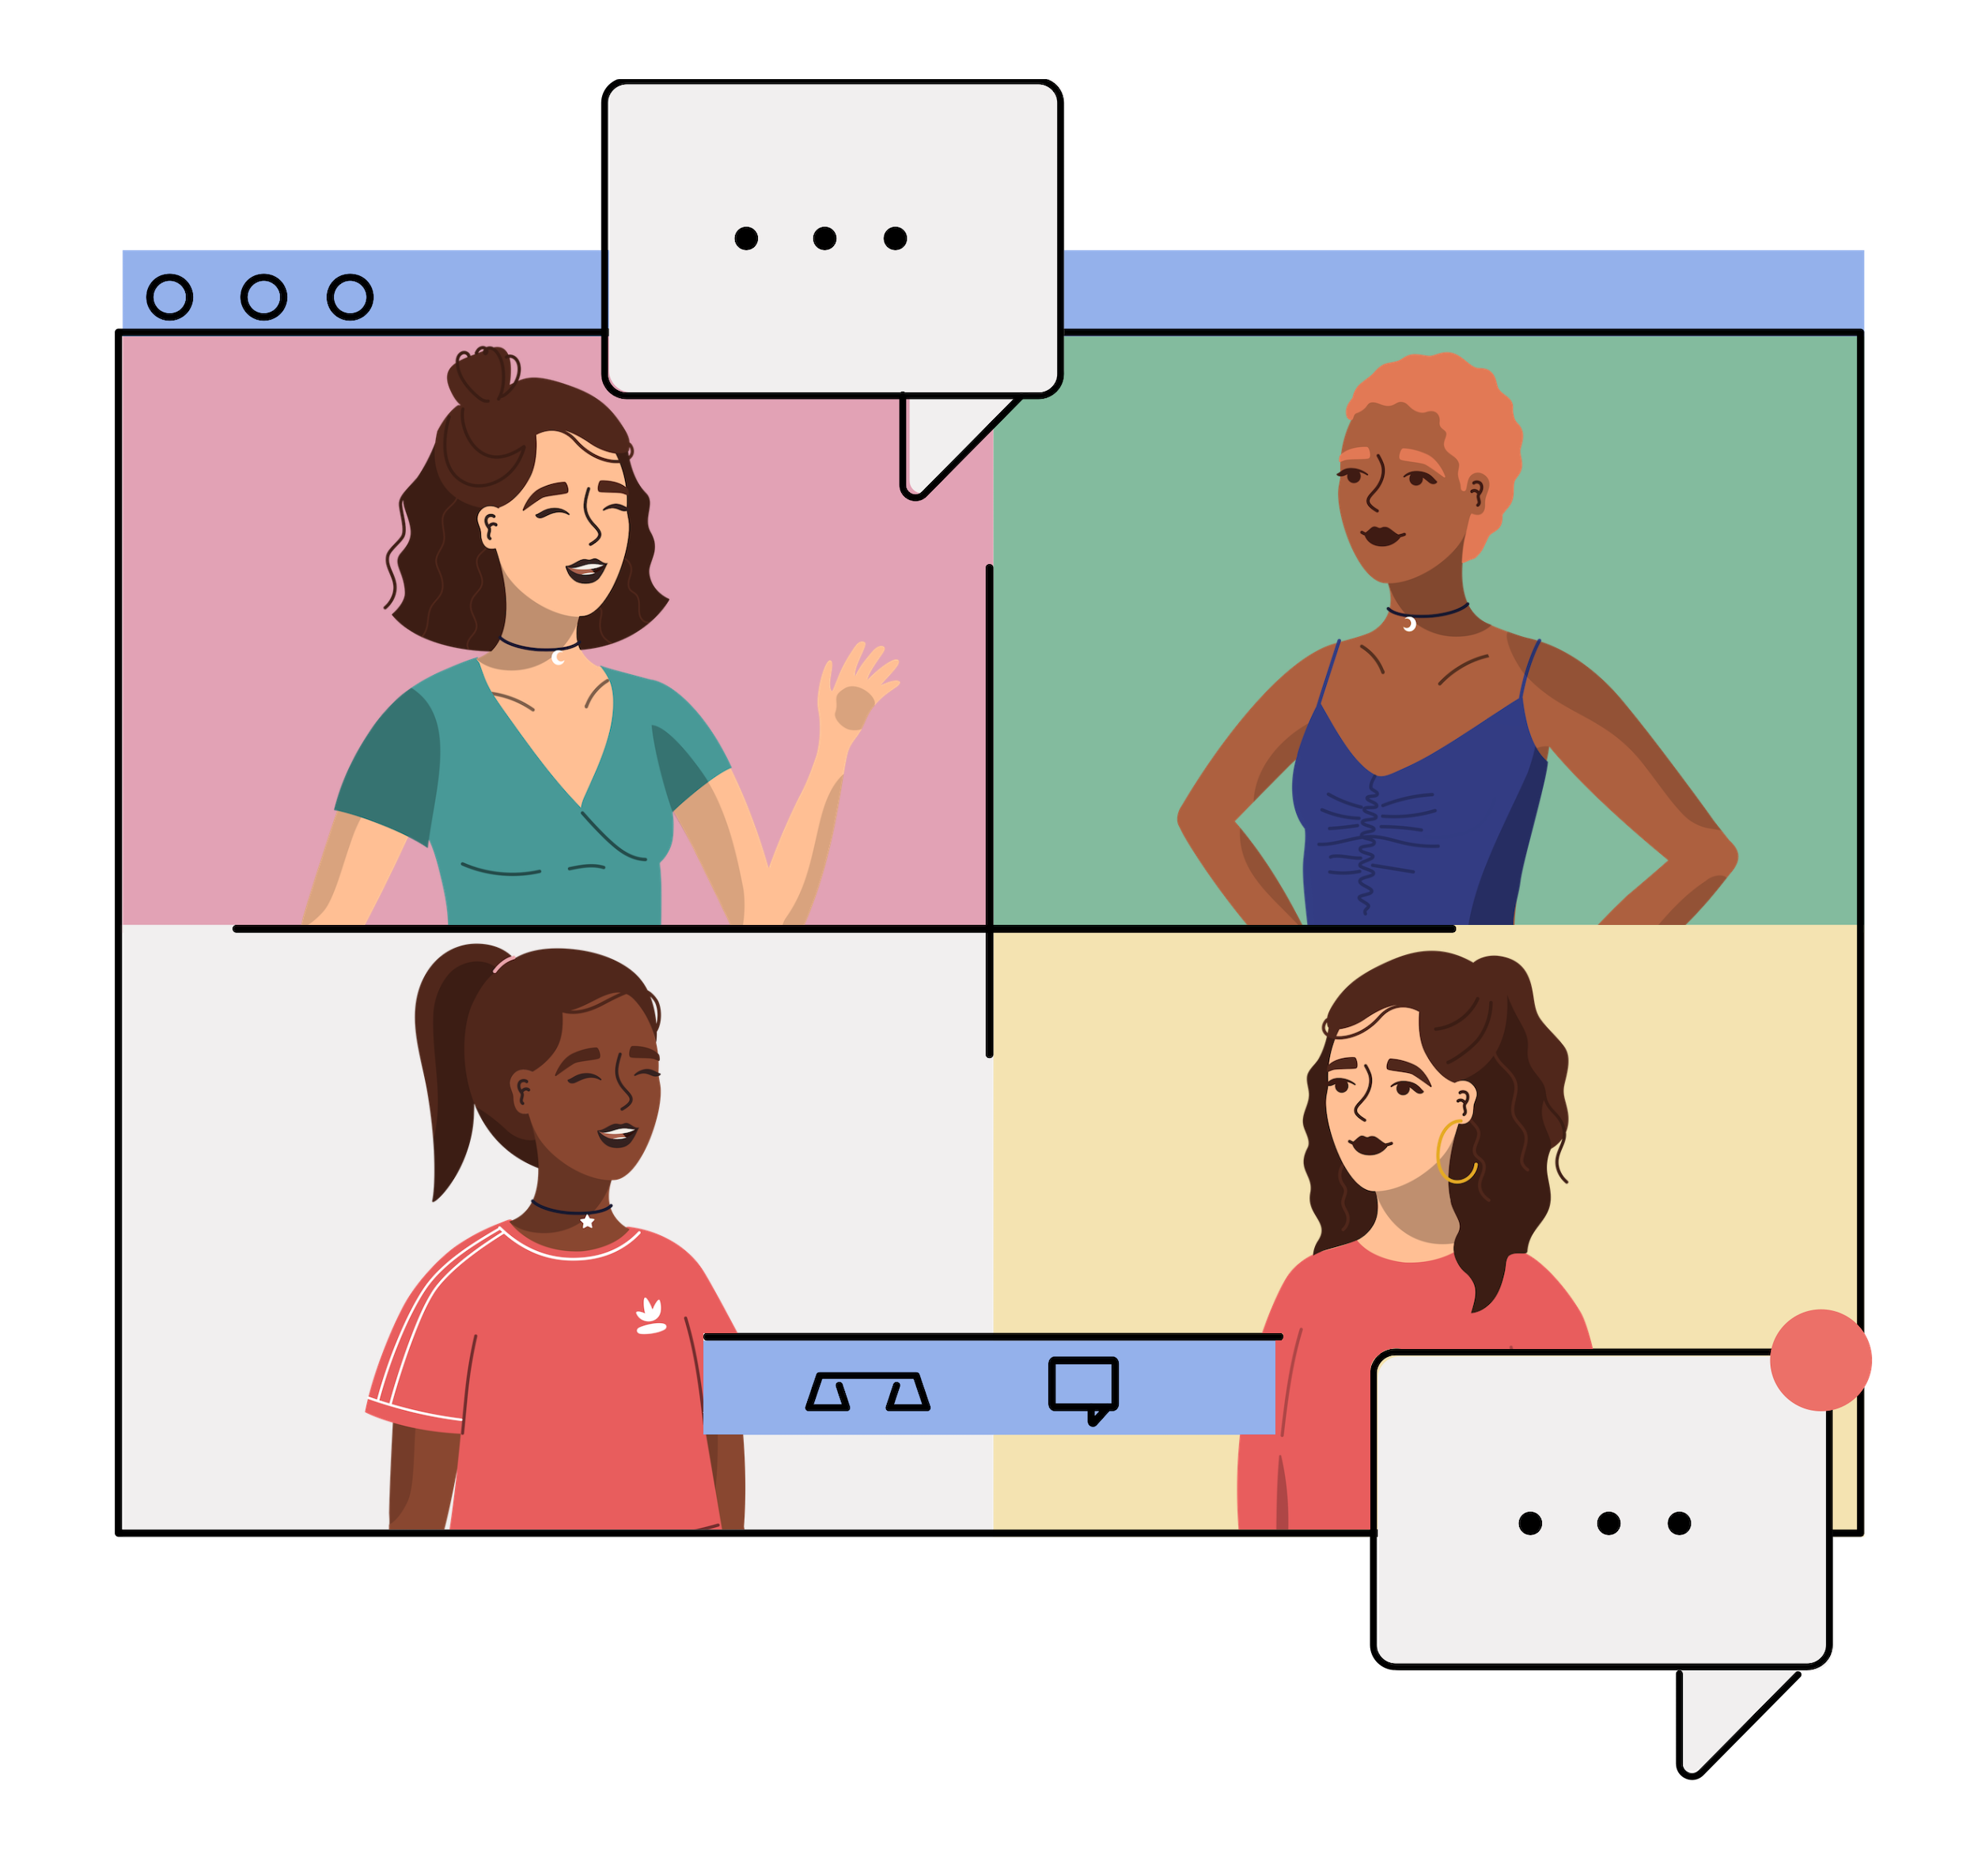 Alyssa greets 3 participants in a group coaching session video call. Illustrated image features group members in virtual meeting.